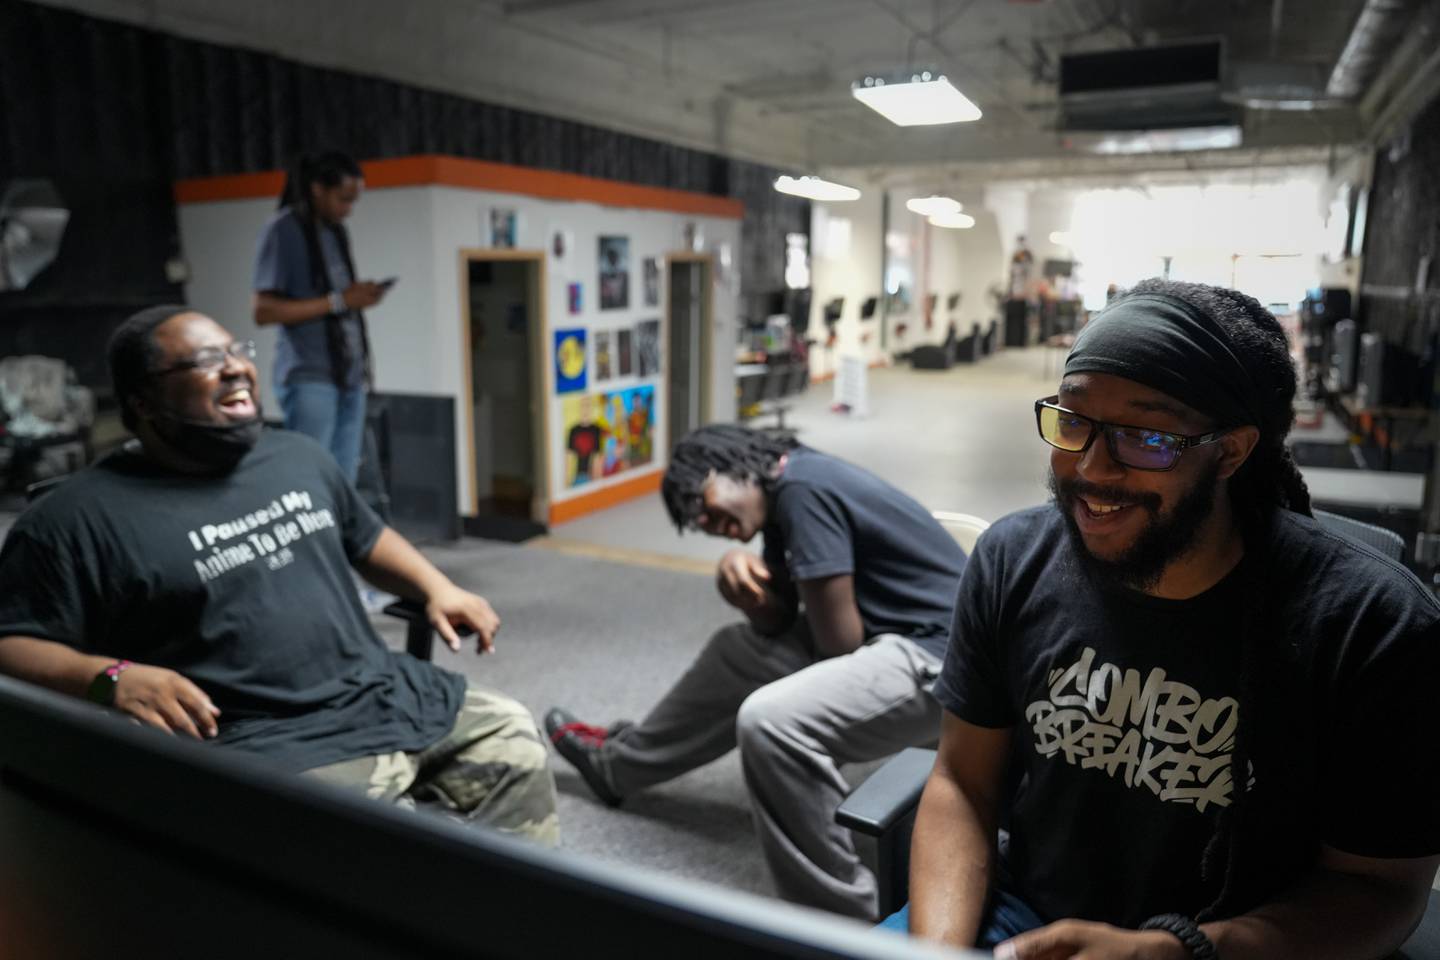 Carl Lloyd, Heavin Jackson and Duane Hinton laugh while playing games at M.A.P. Technologies in downtown Baltimore on 6/11/22.